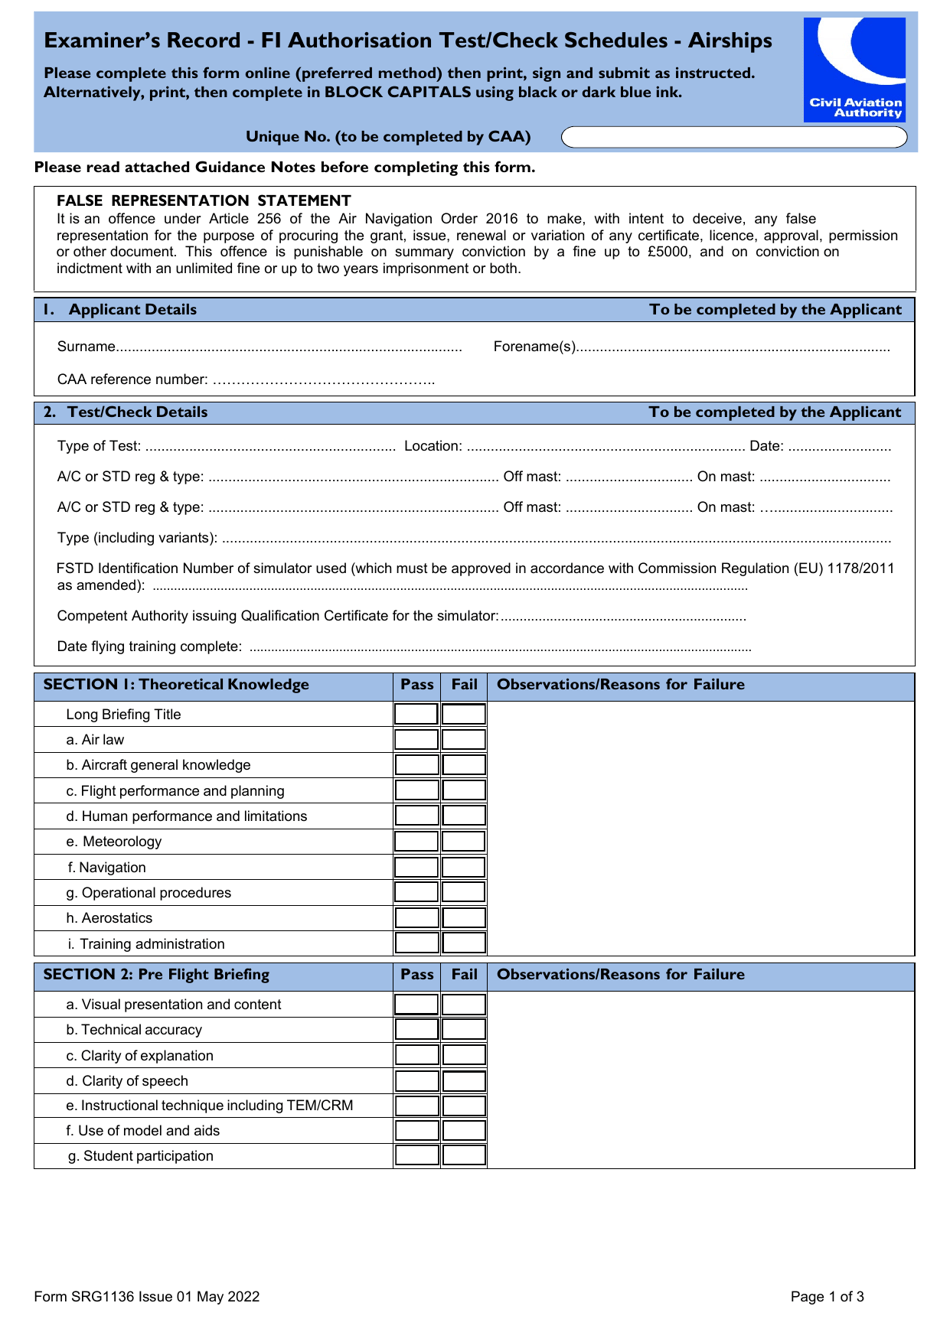 Form SRG1136 Examiners Record - F1 Authorisation Test / Check Schedules - Airships - United Kingdom, Page 1